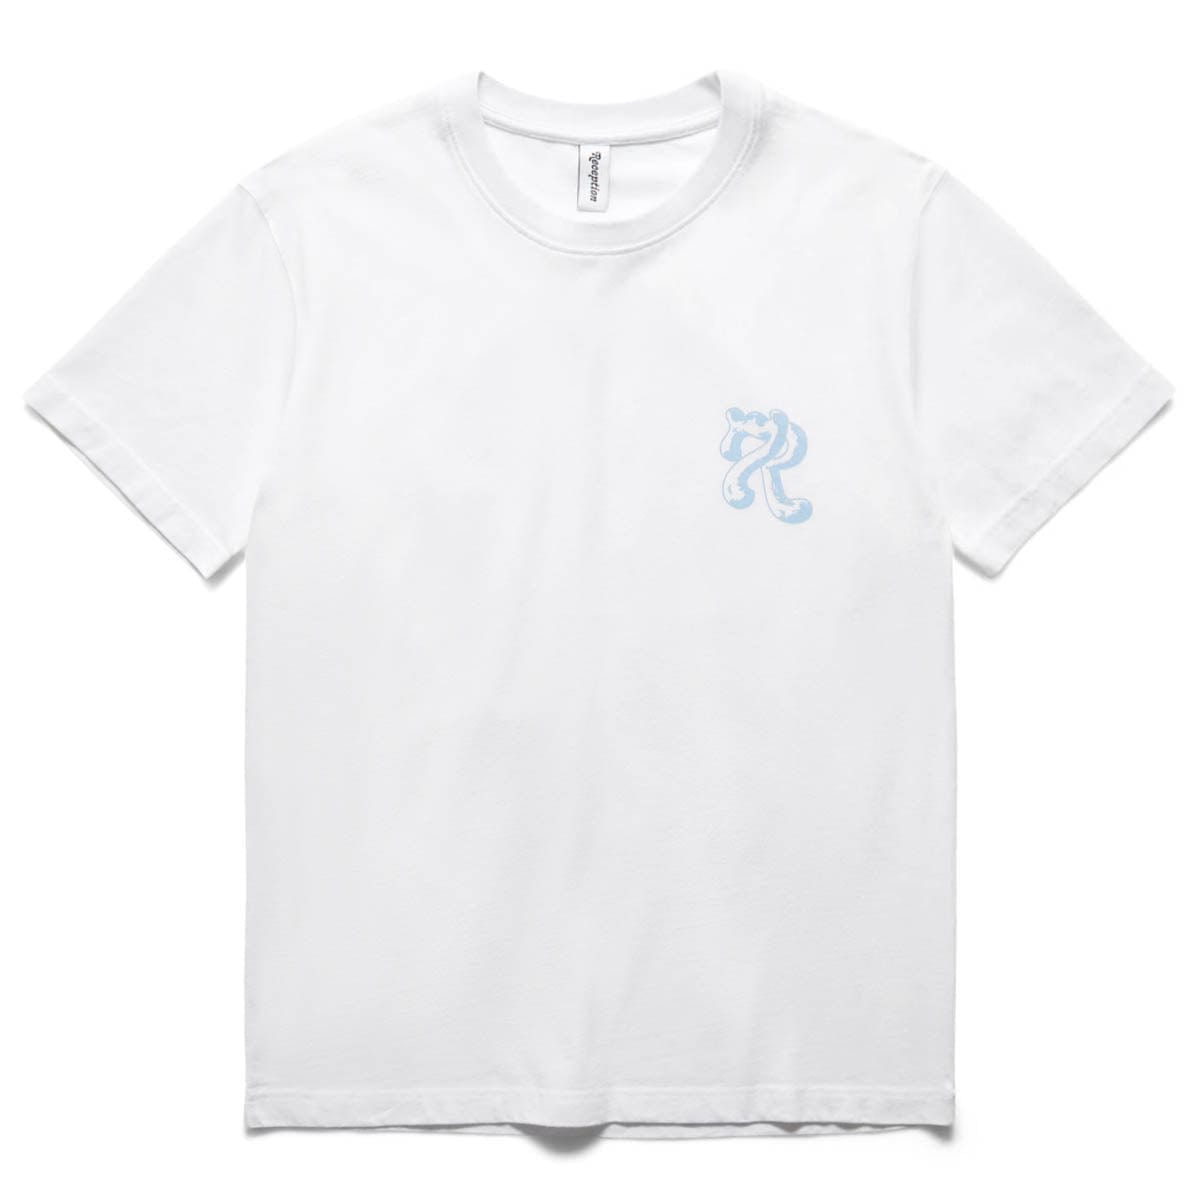 Reception T-Shirts 777 S/S TEE